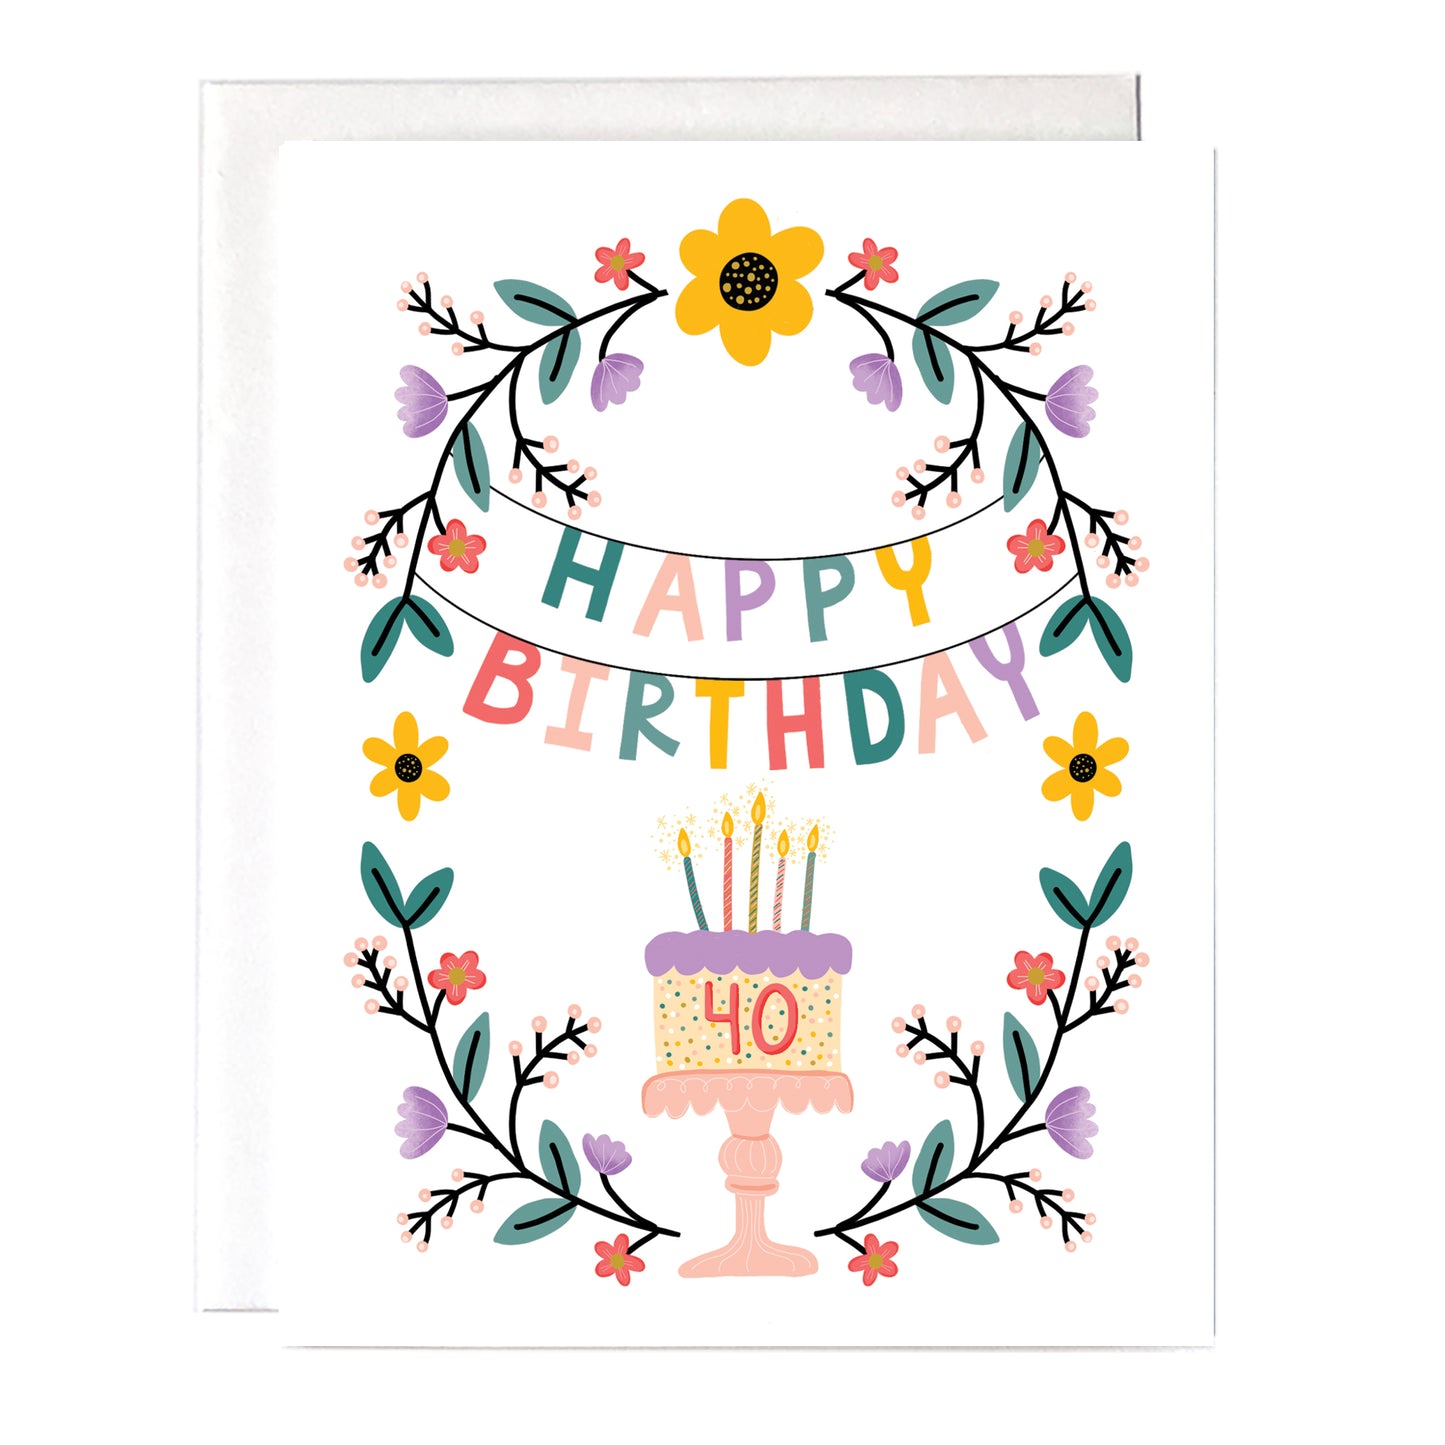 40th Birthday Card with beautiful floral design and birthday cake. Size A2 greeting card (4.25" x 5.5") with envelope, blank Inside. All cards are designed and Illustrated with love by me, Anna Fox, and are printed at my friendly neighborhood print shop in Denver, CO.